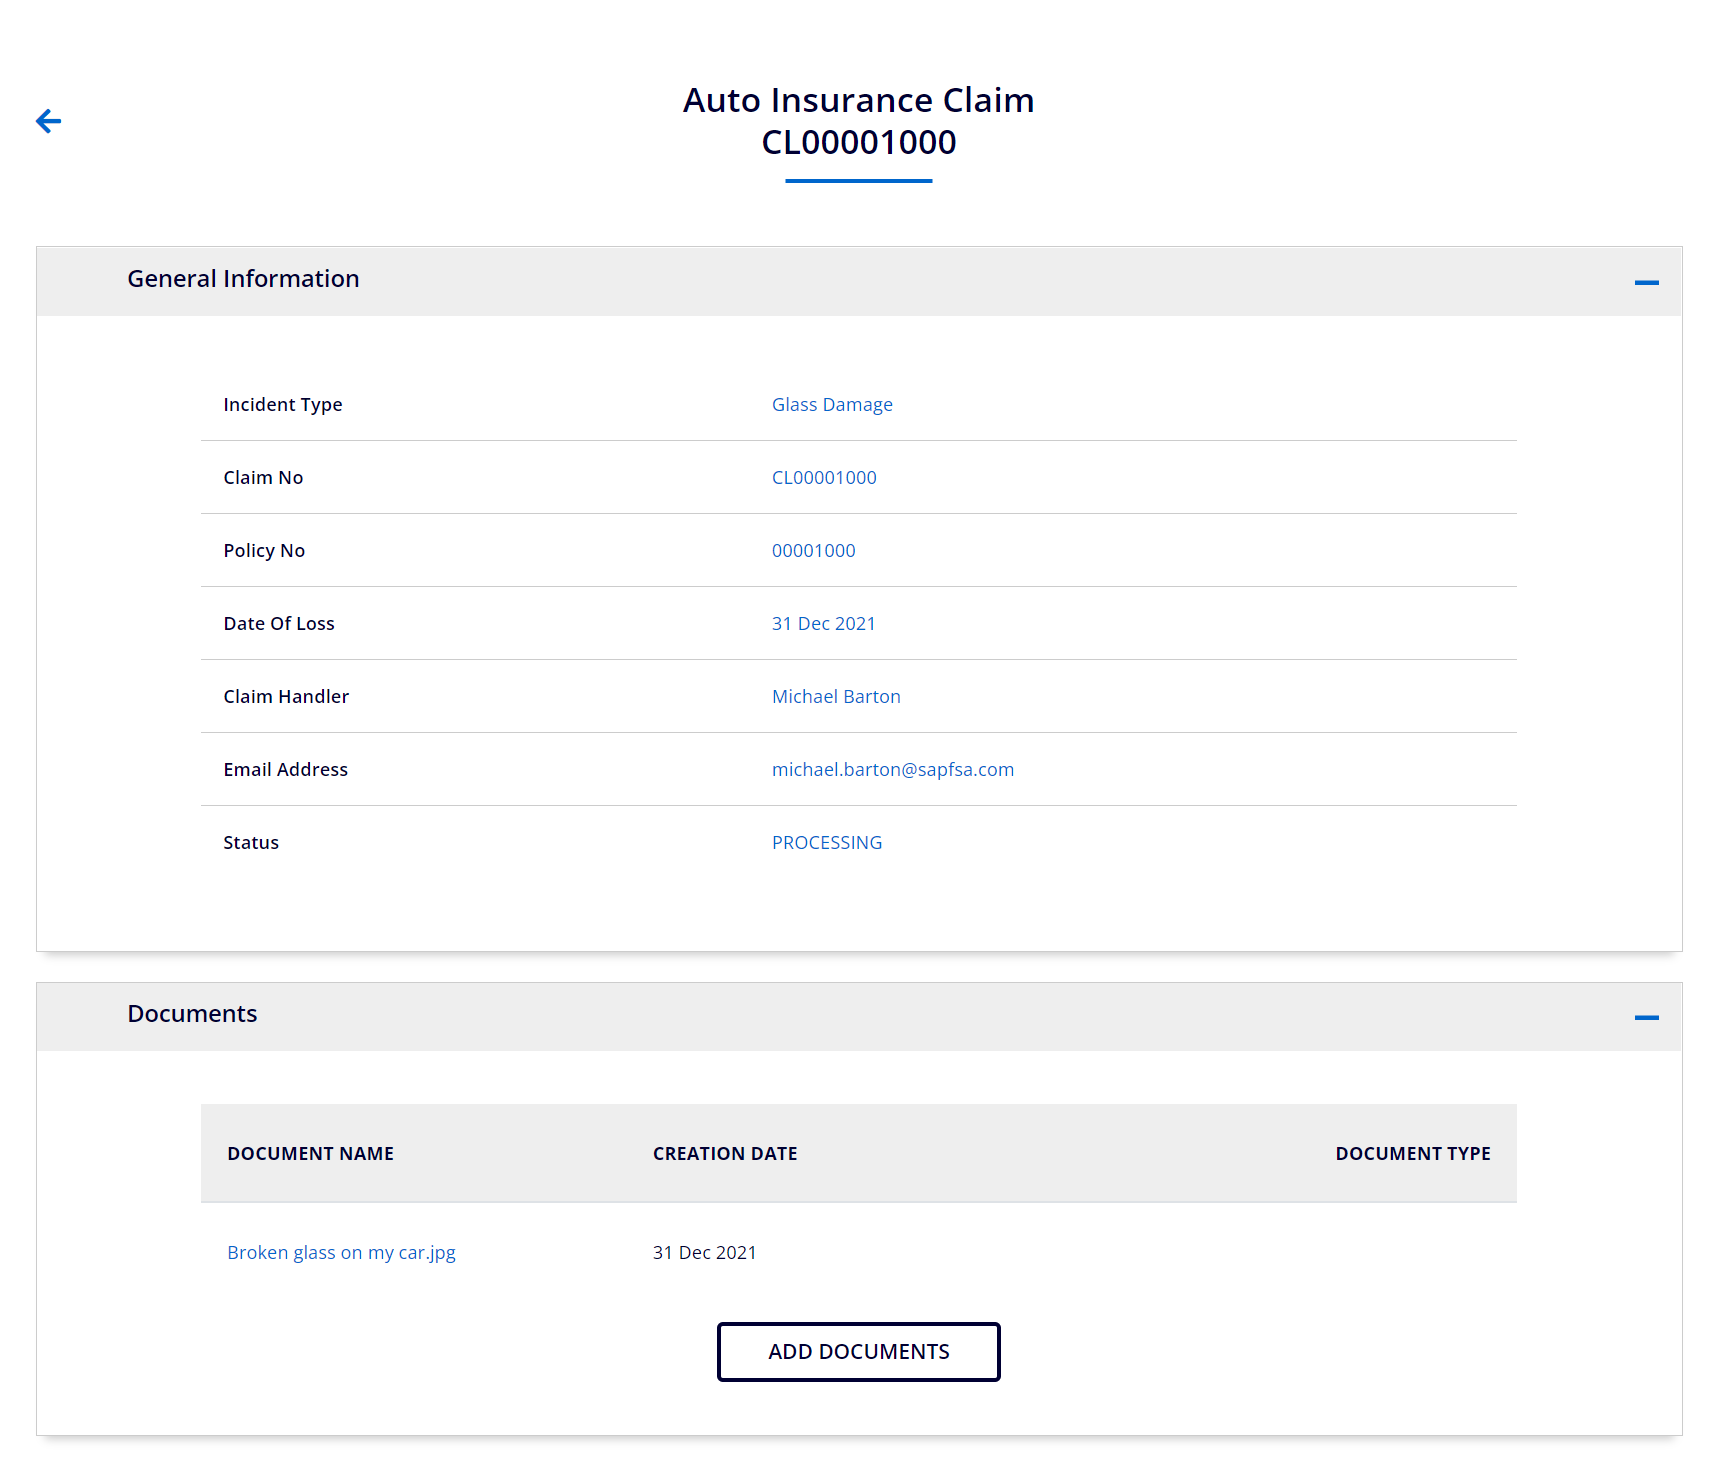 Adding documents from Claims Details page